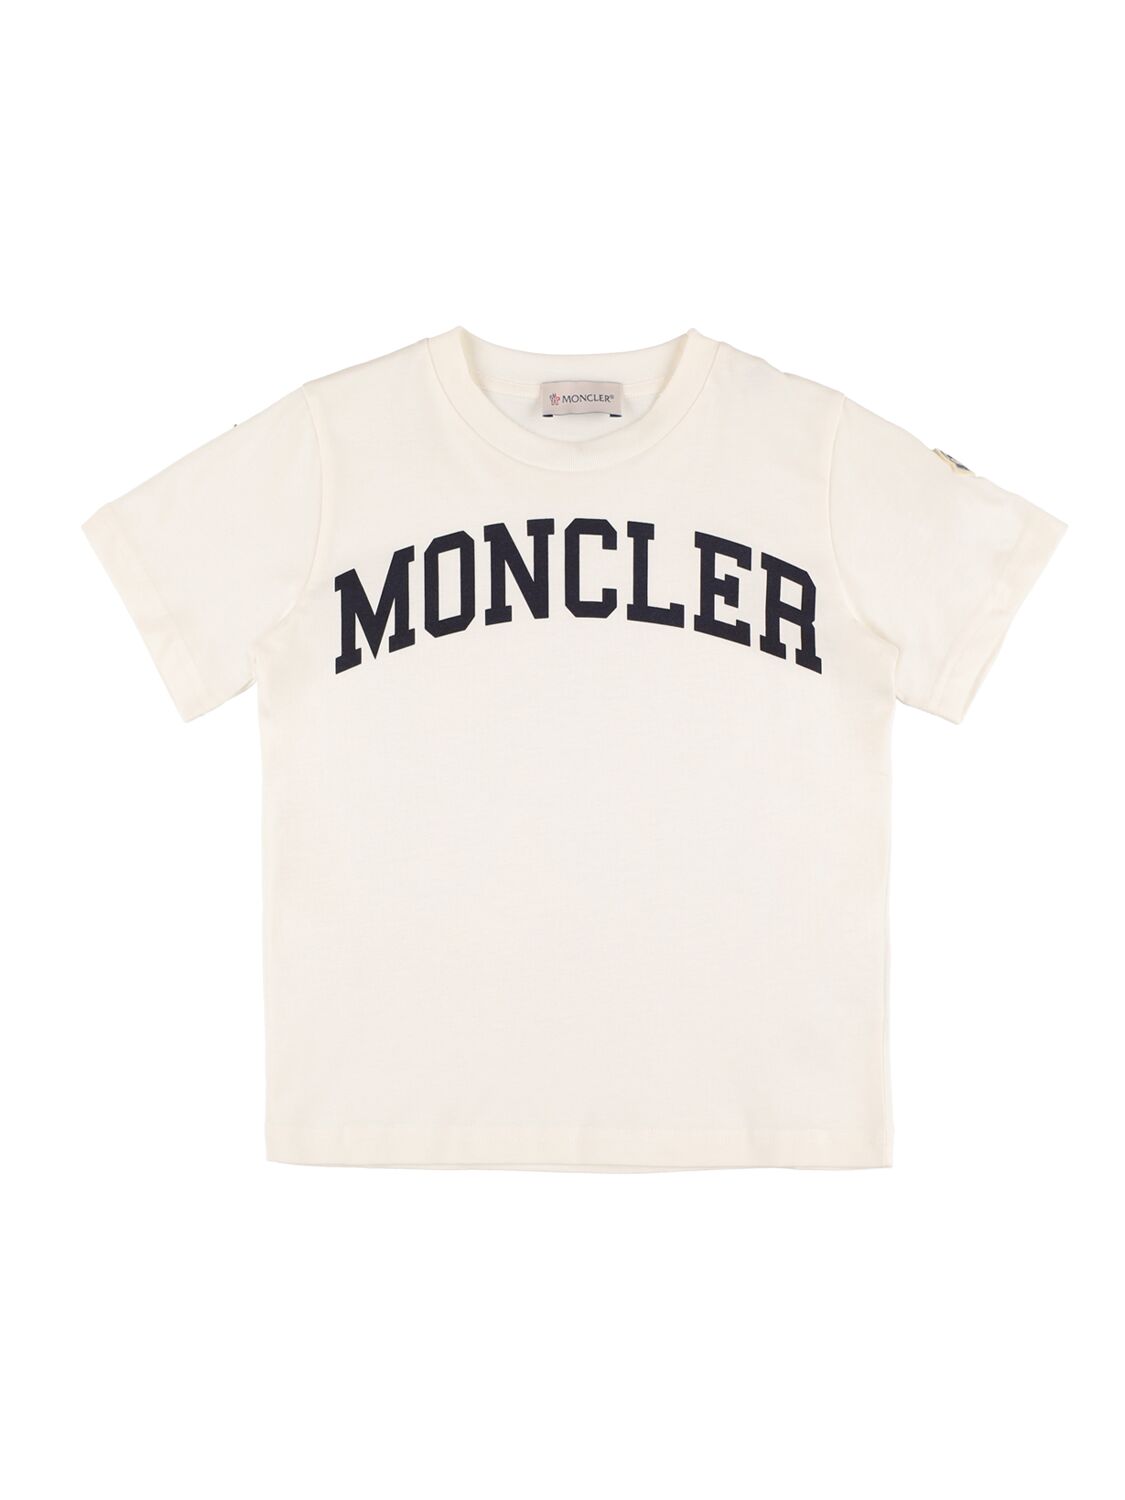 Moncler Kids' Printed Cotton Jersey T-shirt In Natural